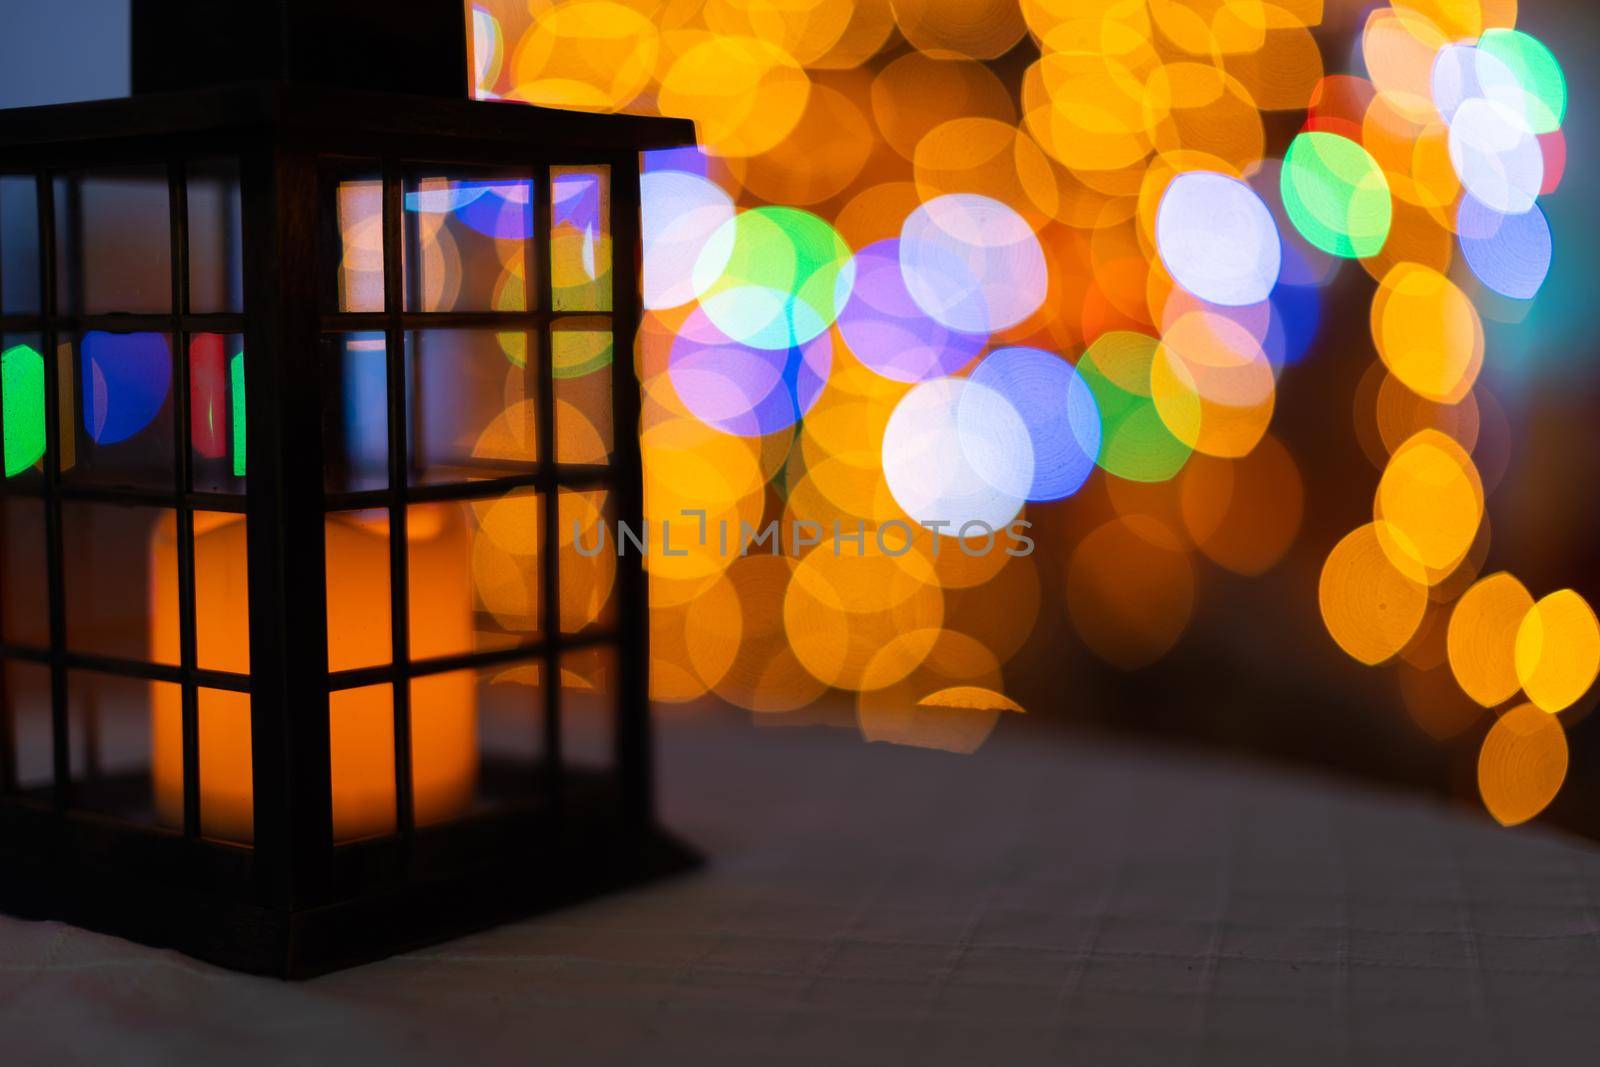 A darkened old hand lantern with a barely smoldering candle inside. On the second burn the background is blurred with Christmas tree lights and bokeh by fotodrobik